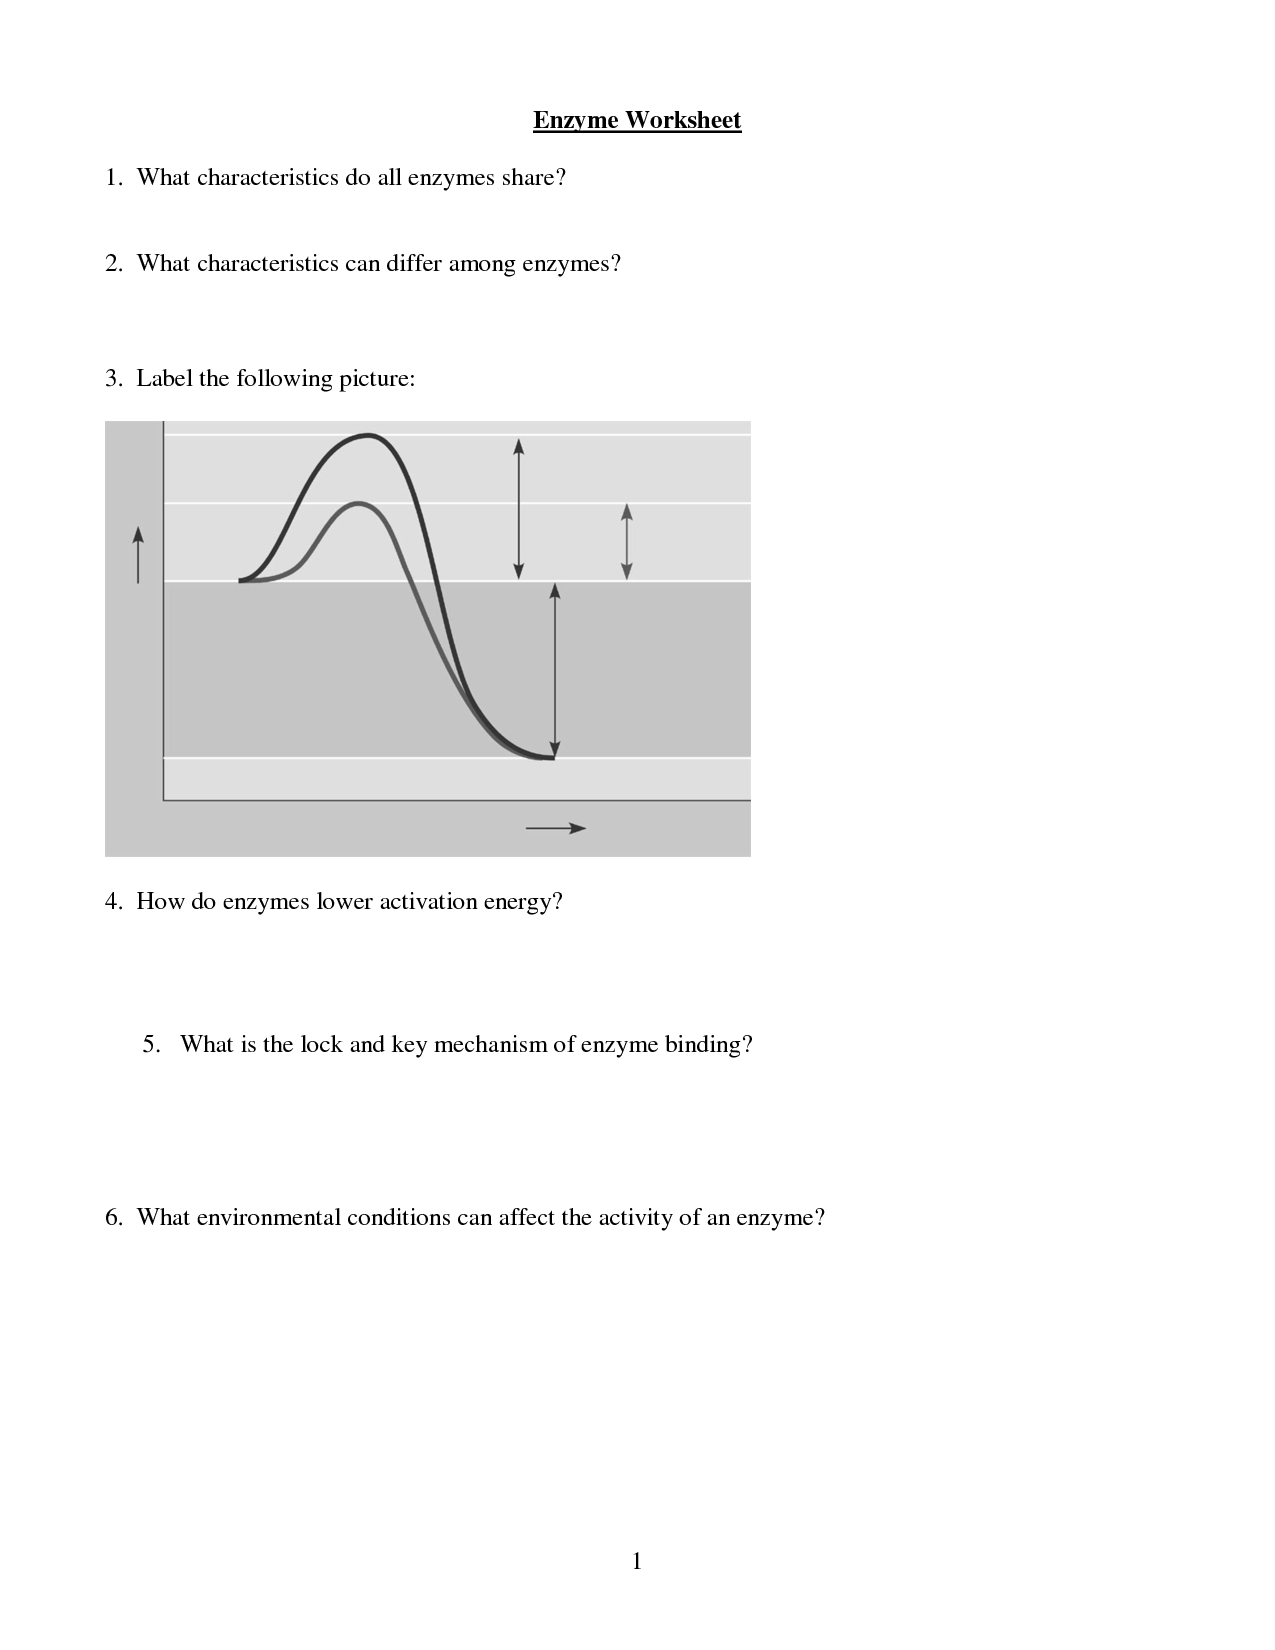 enzyme-graphing-worksheet-answers-upnatural